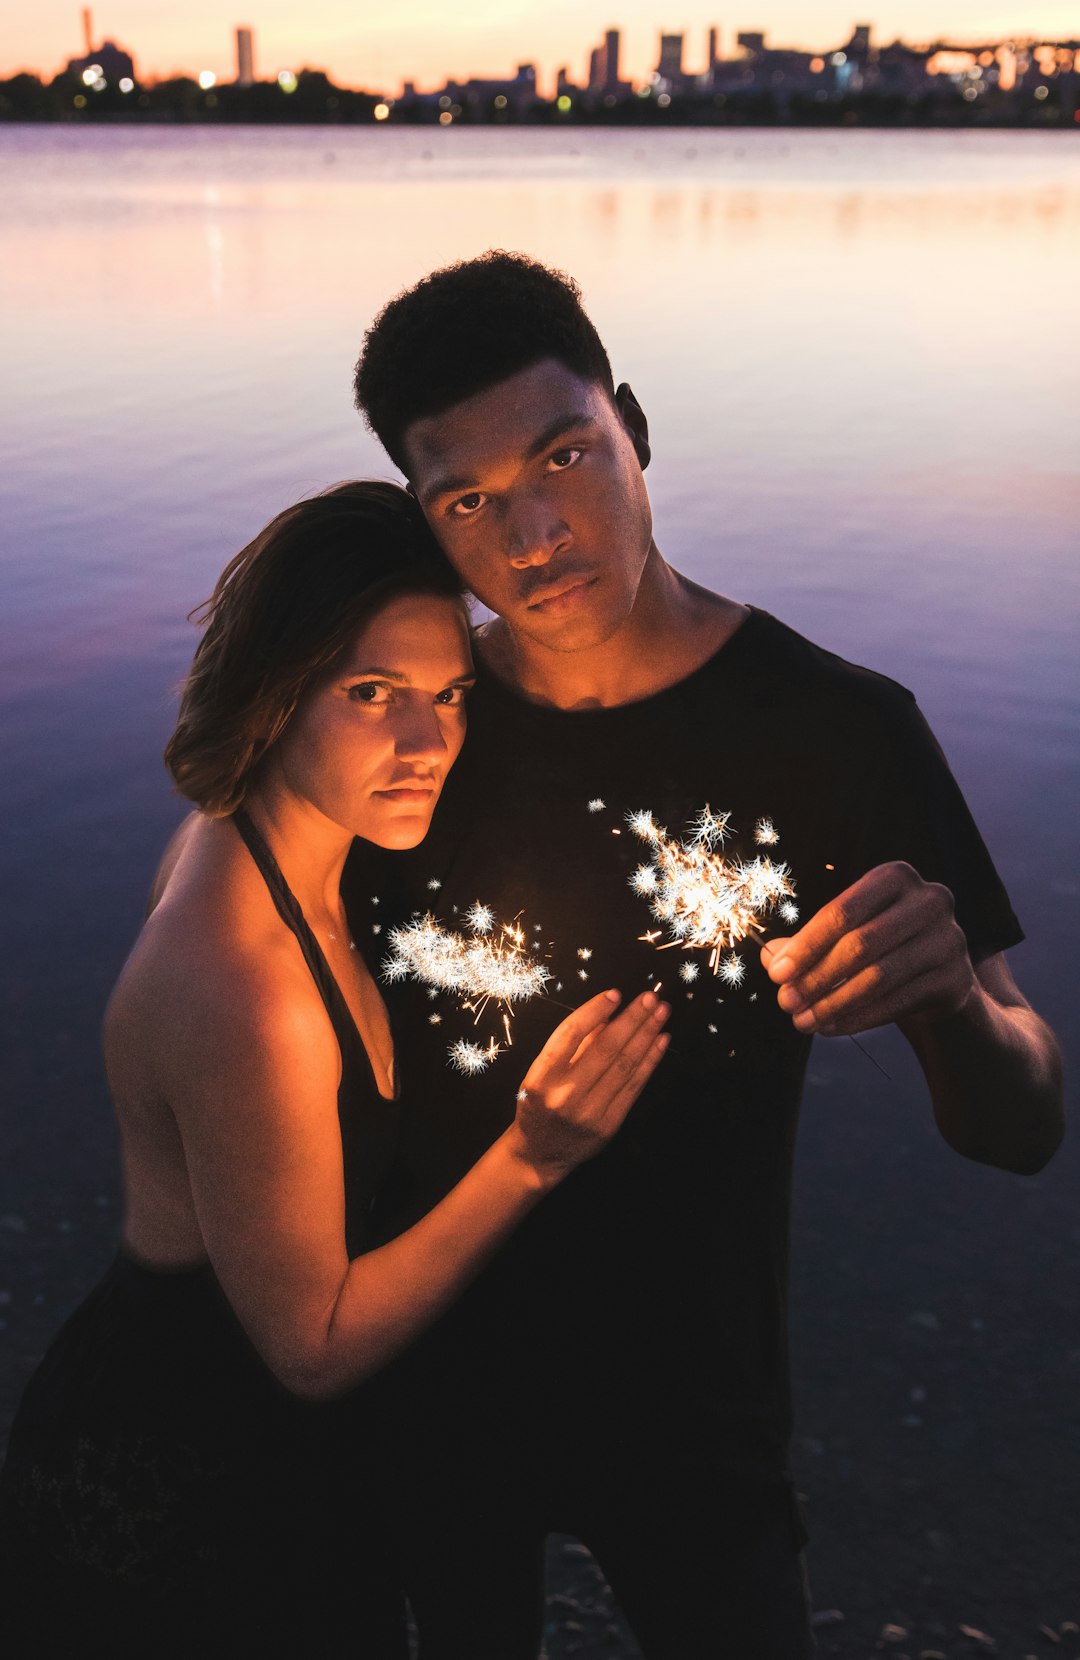 couple holding sparklers standing near body of water at dusk